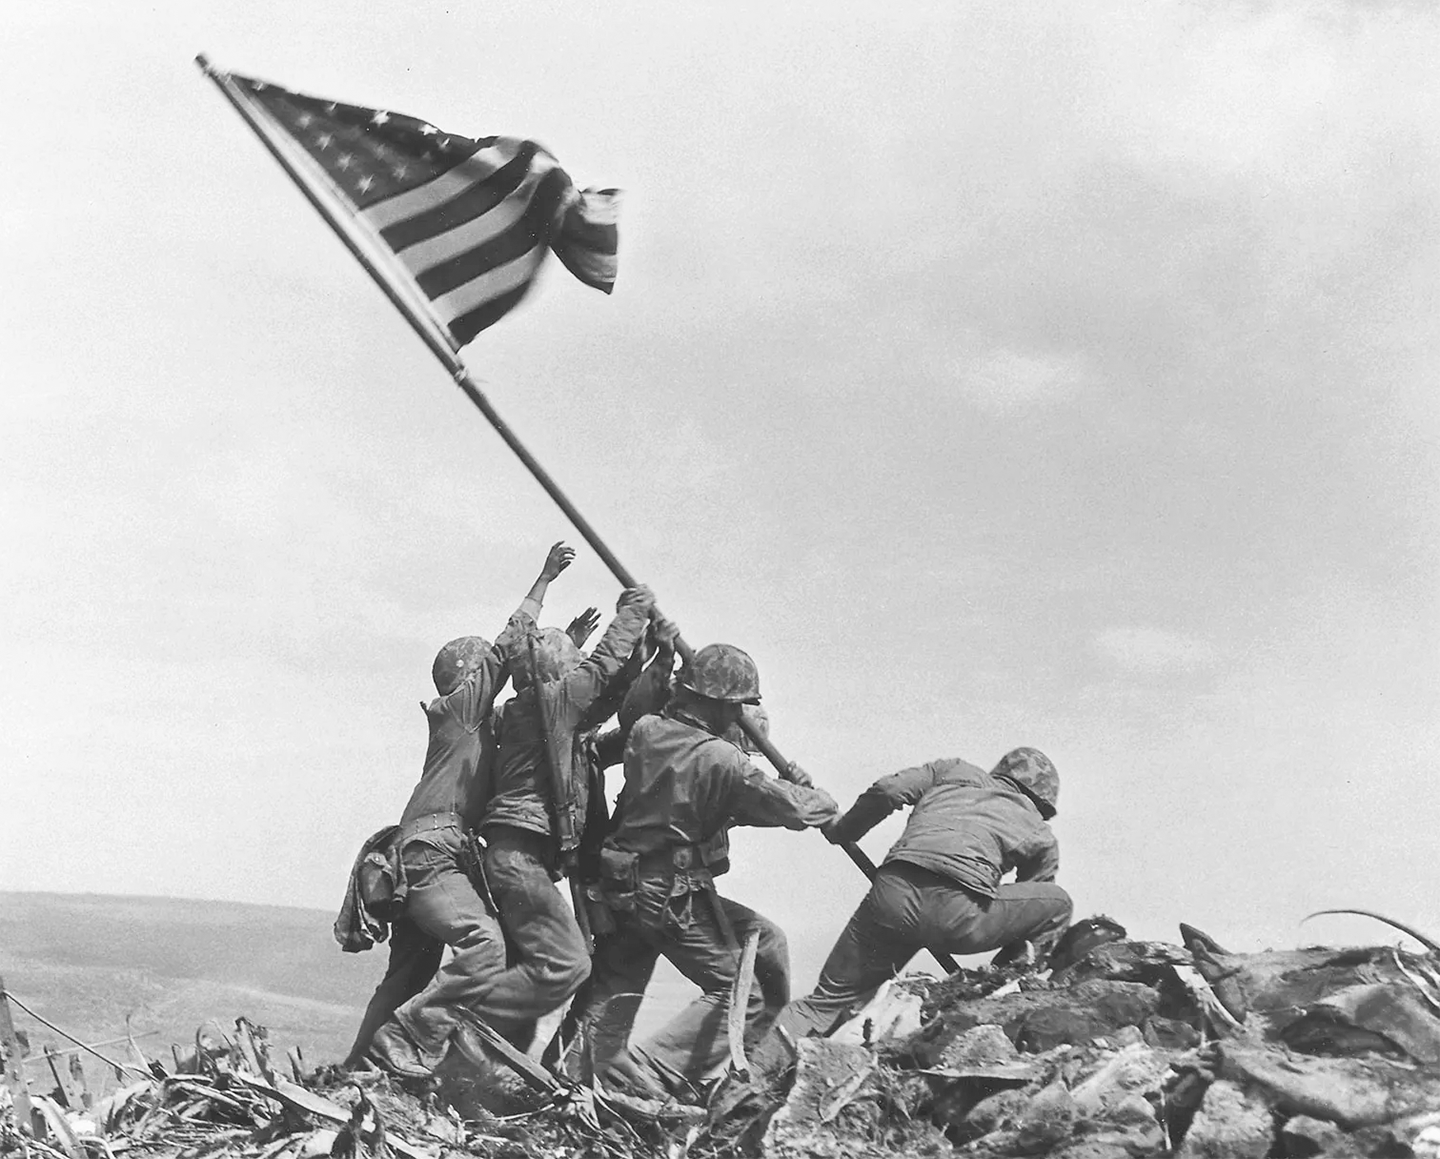 The detachment of Marines that included Native American Ira Hayes raising the flag atop Mount Suribachi in what was to become the most famous wartime photographs in history. (Submitted photo)